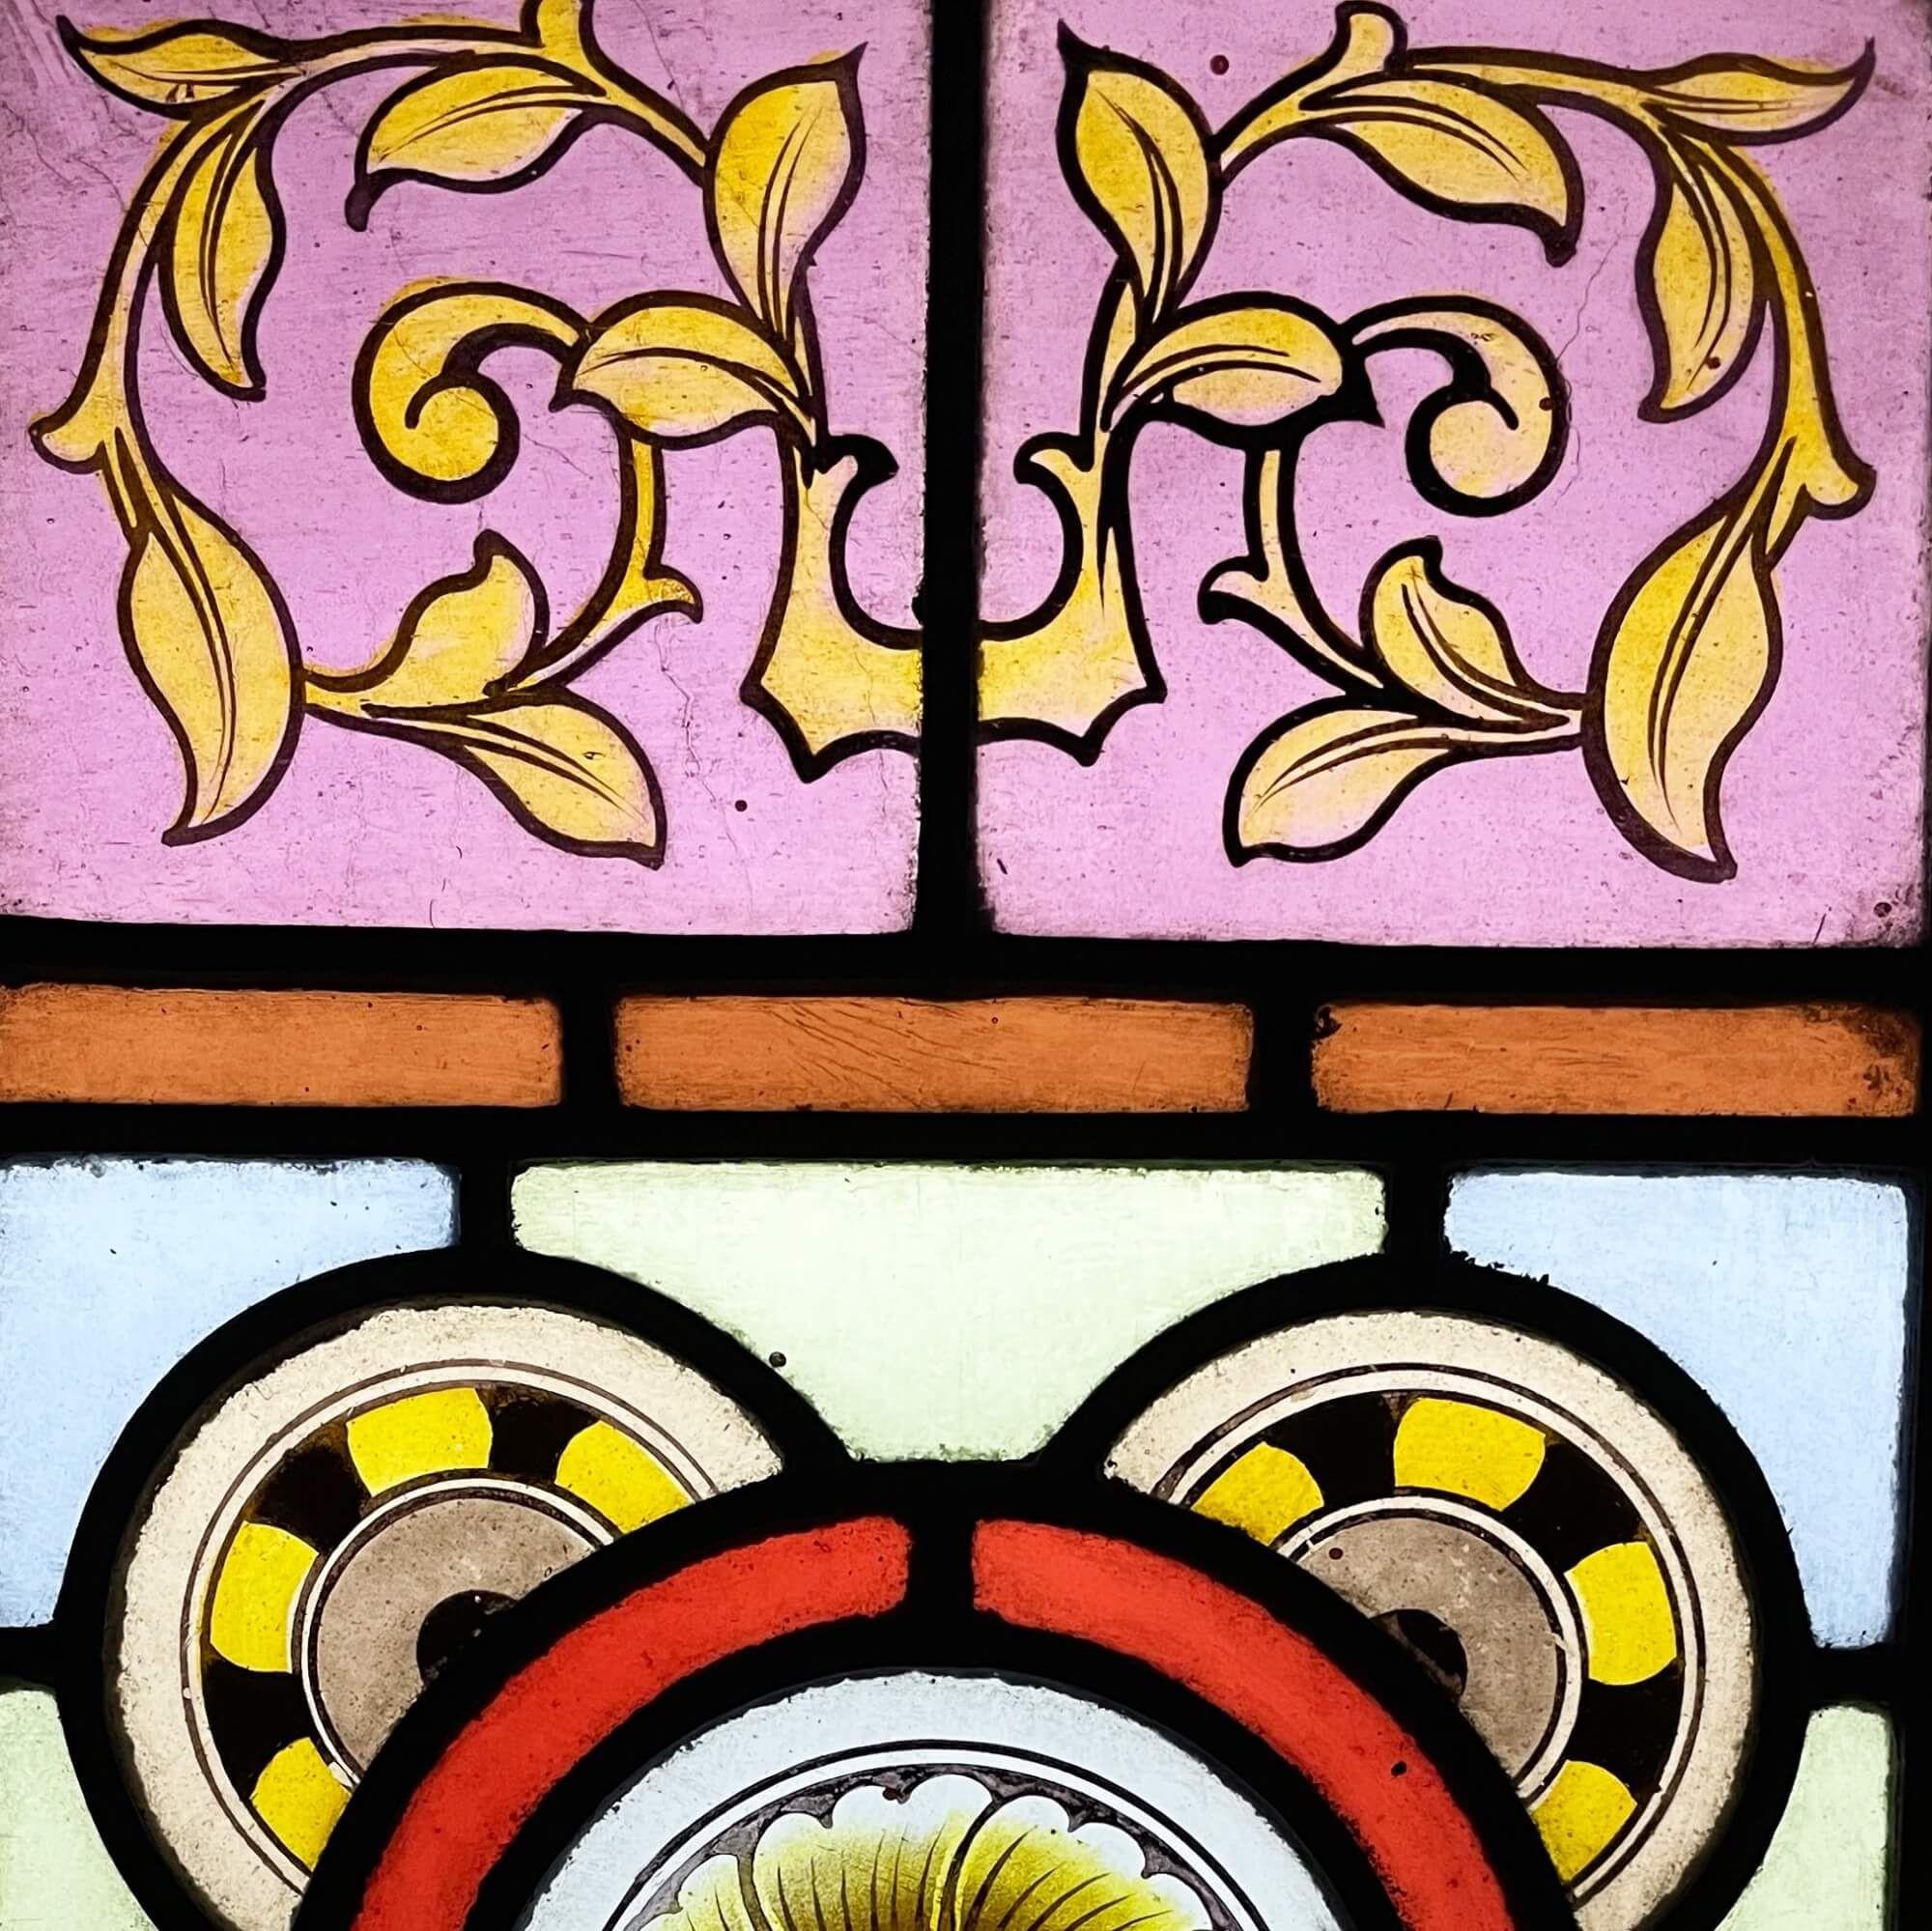 English Vibrant Antique Stained Glass Window For Sale